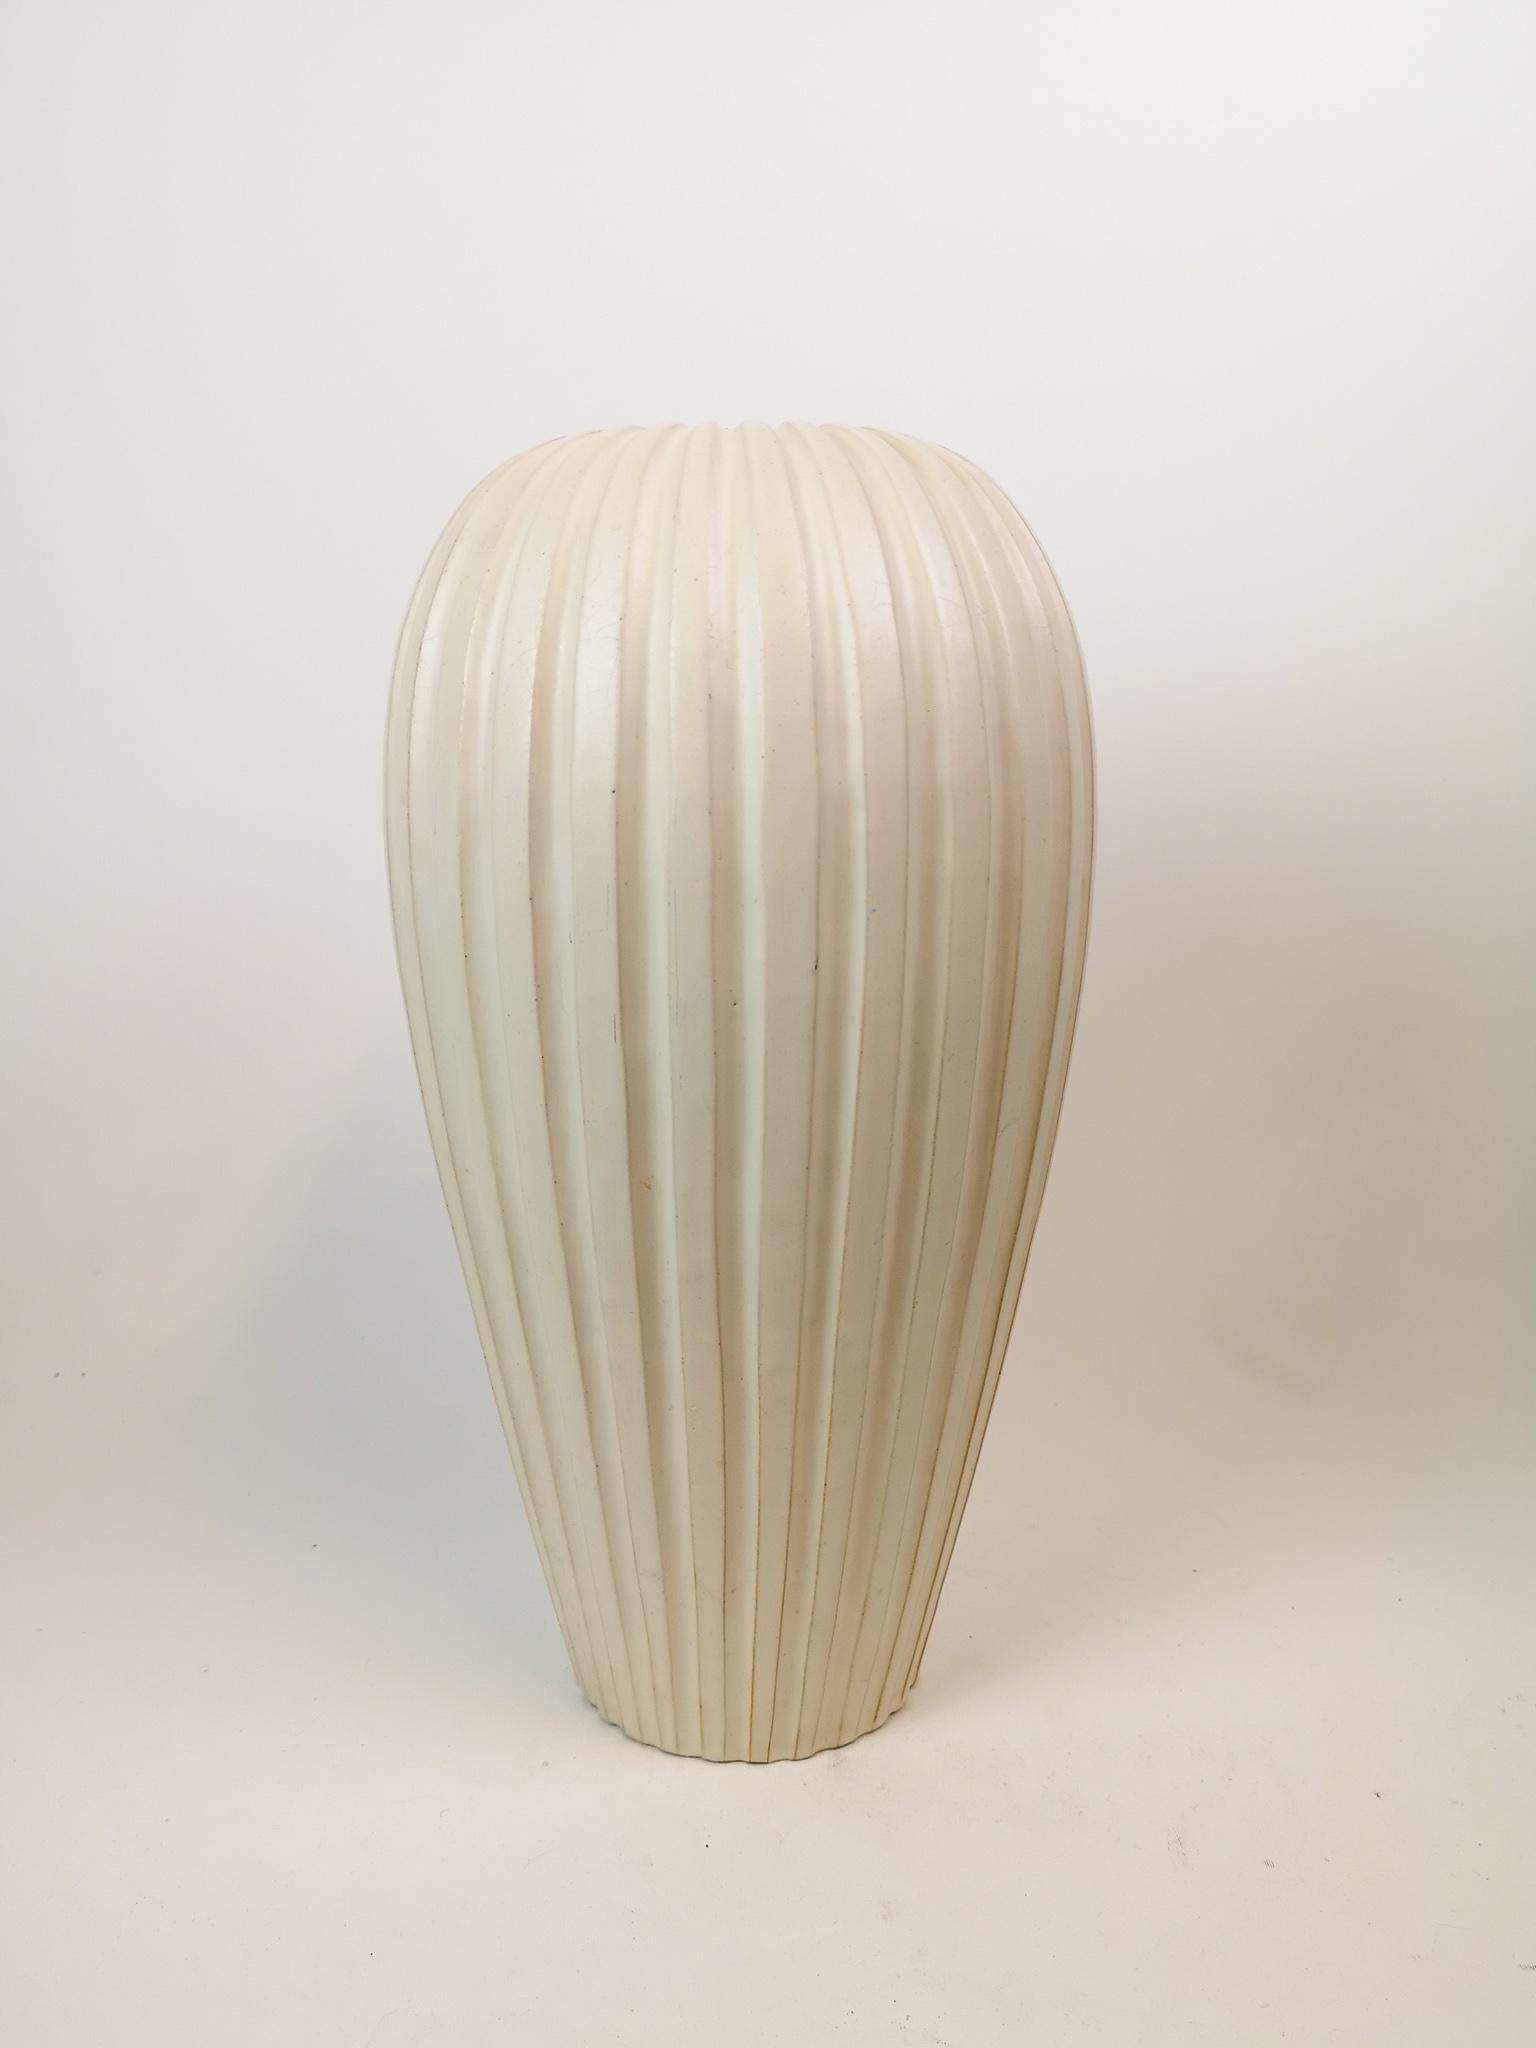 Wonderful large floor vase. Produced at Ekeby and designed by Vicke Lindstand in the 1940s.
Its streamline shape makes it perfectly adapted to the modern home. Drilled hole on the top. 

Good vintage condition.

Measures: H 45 cm, D 22